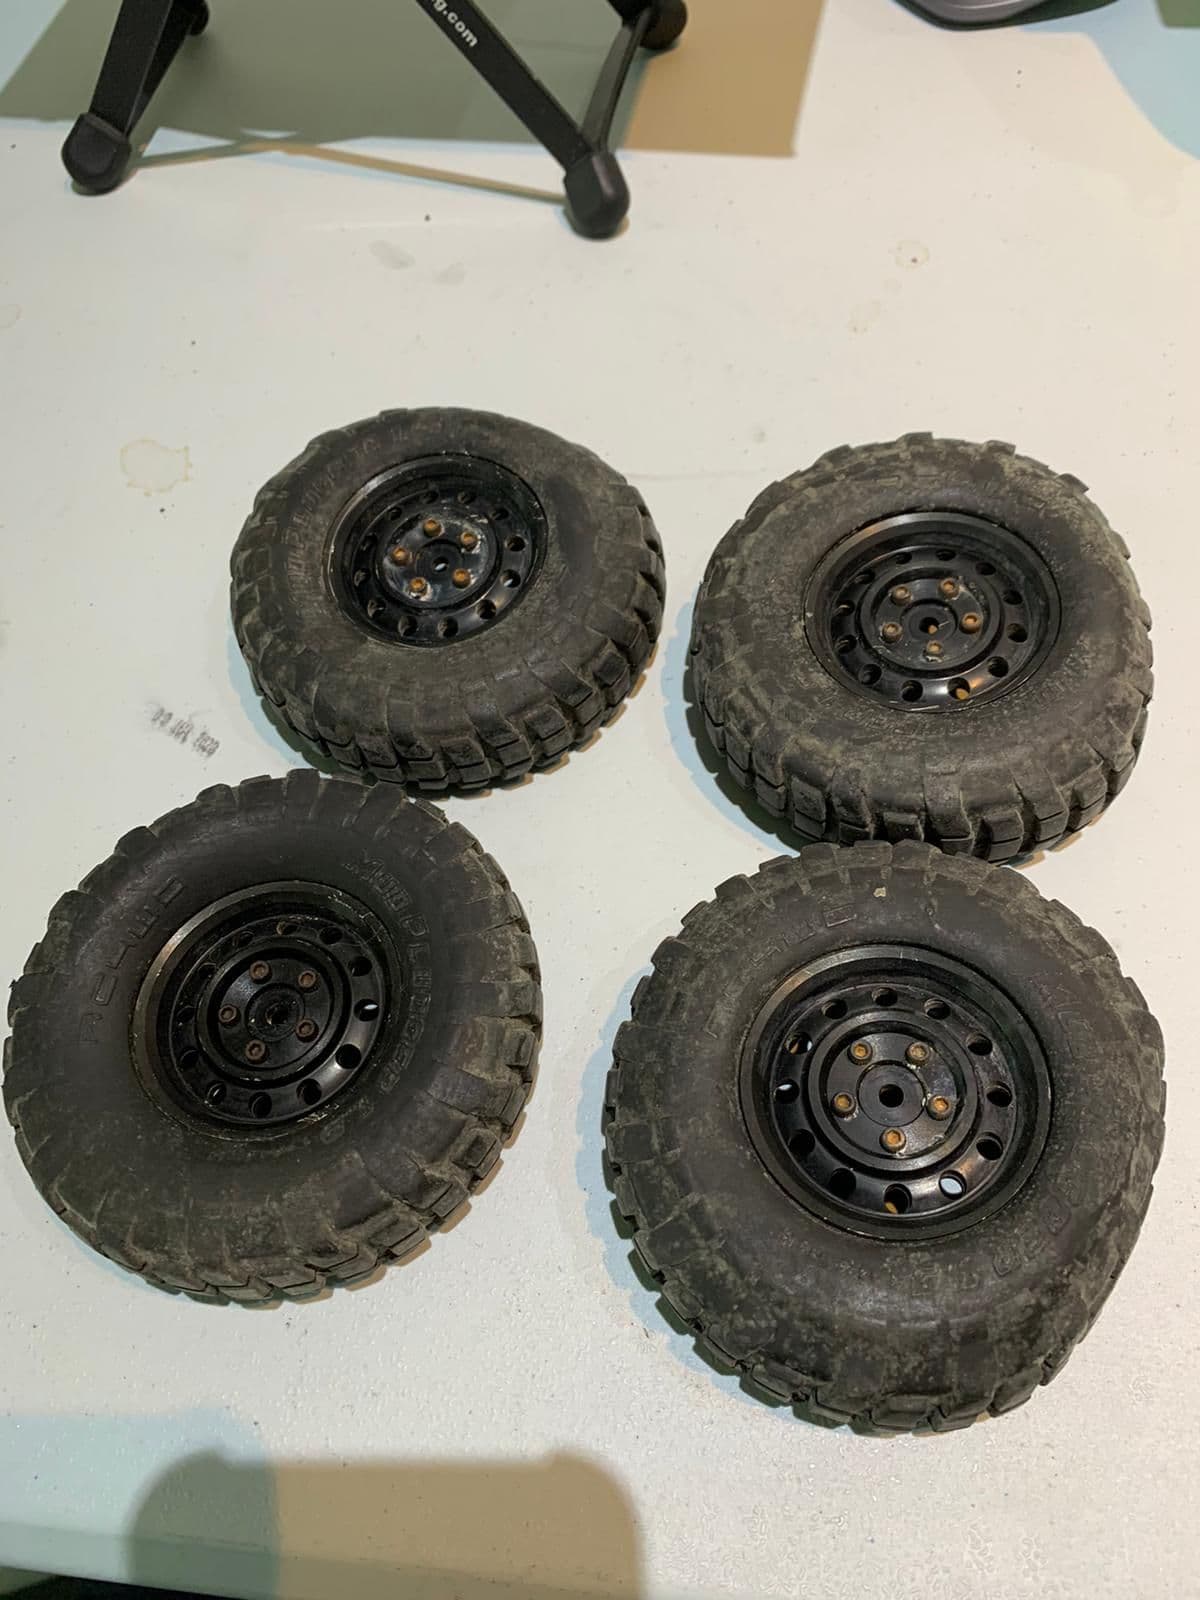 WTS RC4WD SCALE Tyres and Bead Lock Rims - R/C Tech Forums